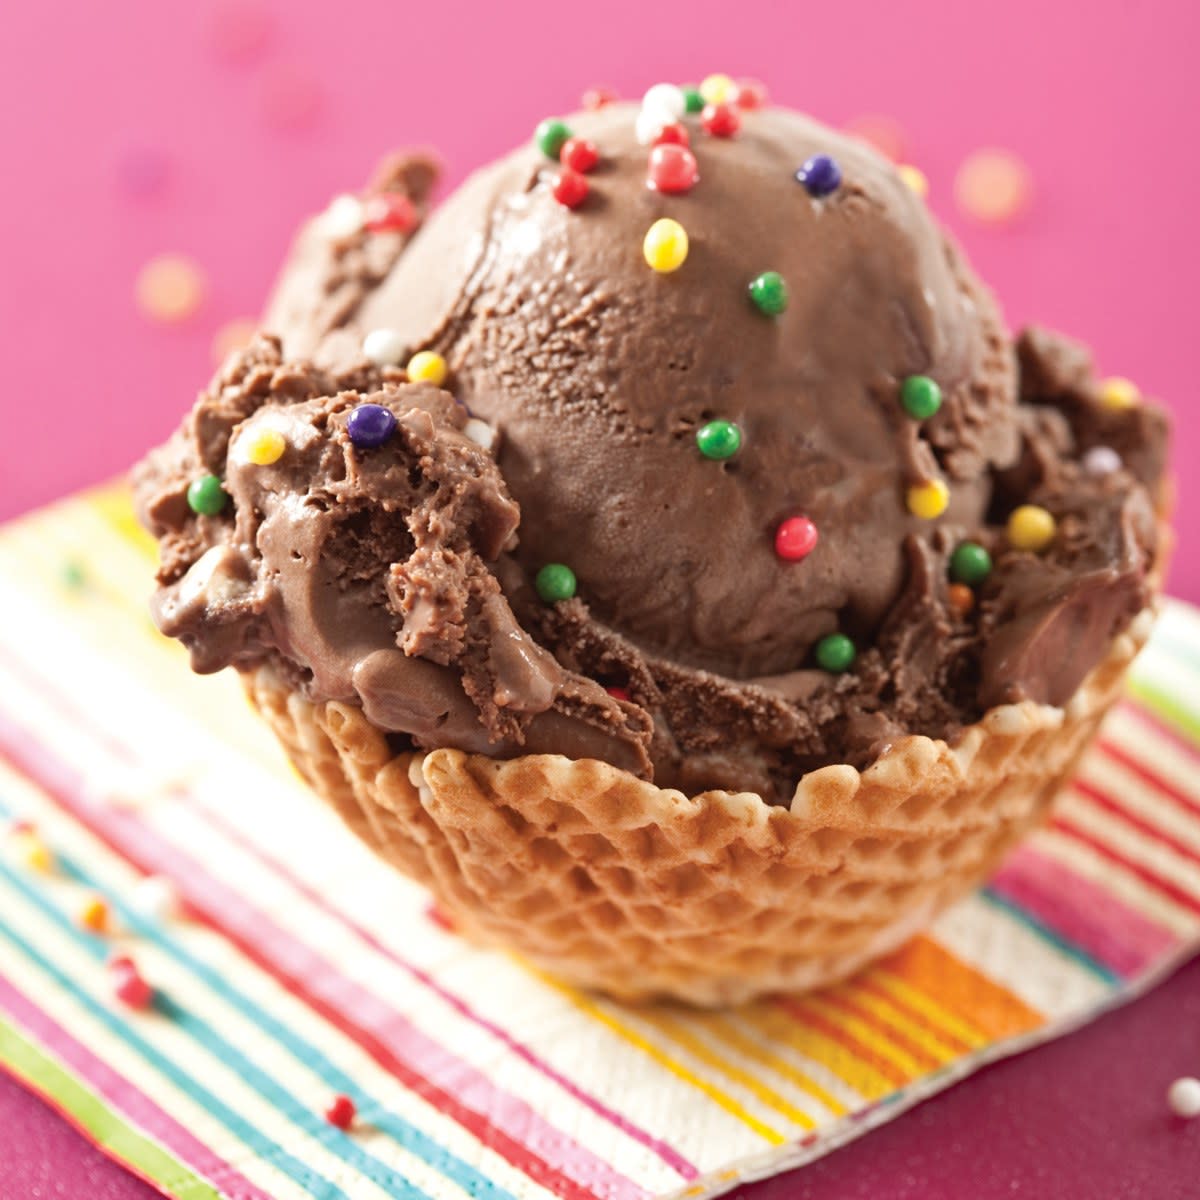 Whip up this simple chocolate ice cream recipe for a treat that will keep you cool all summer long